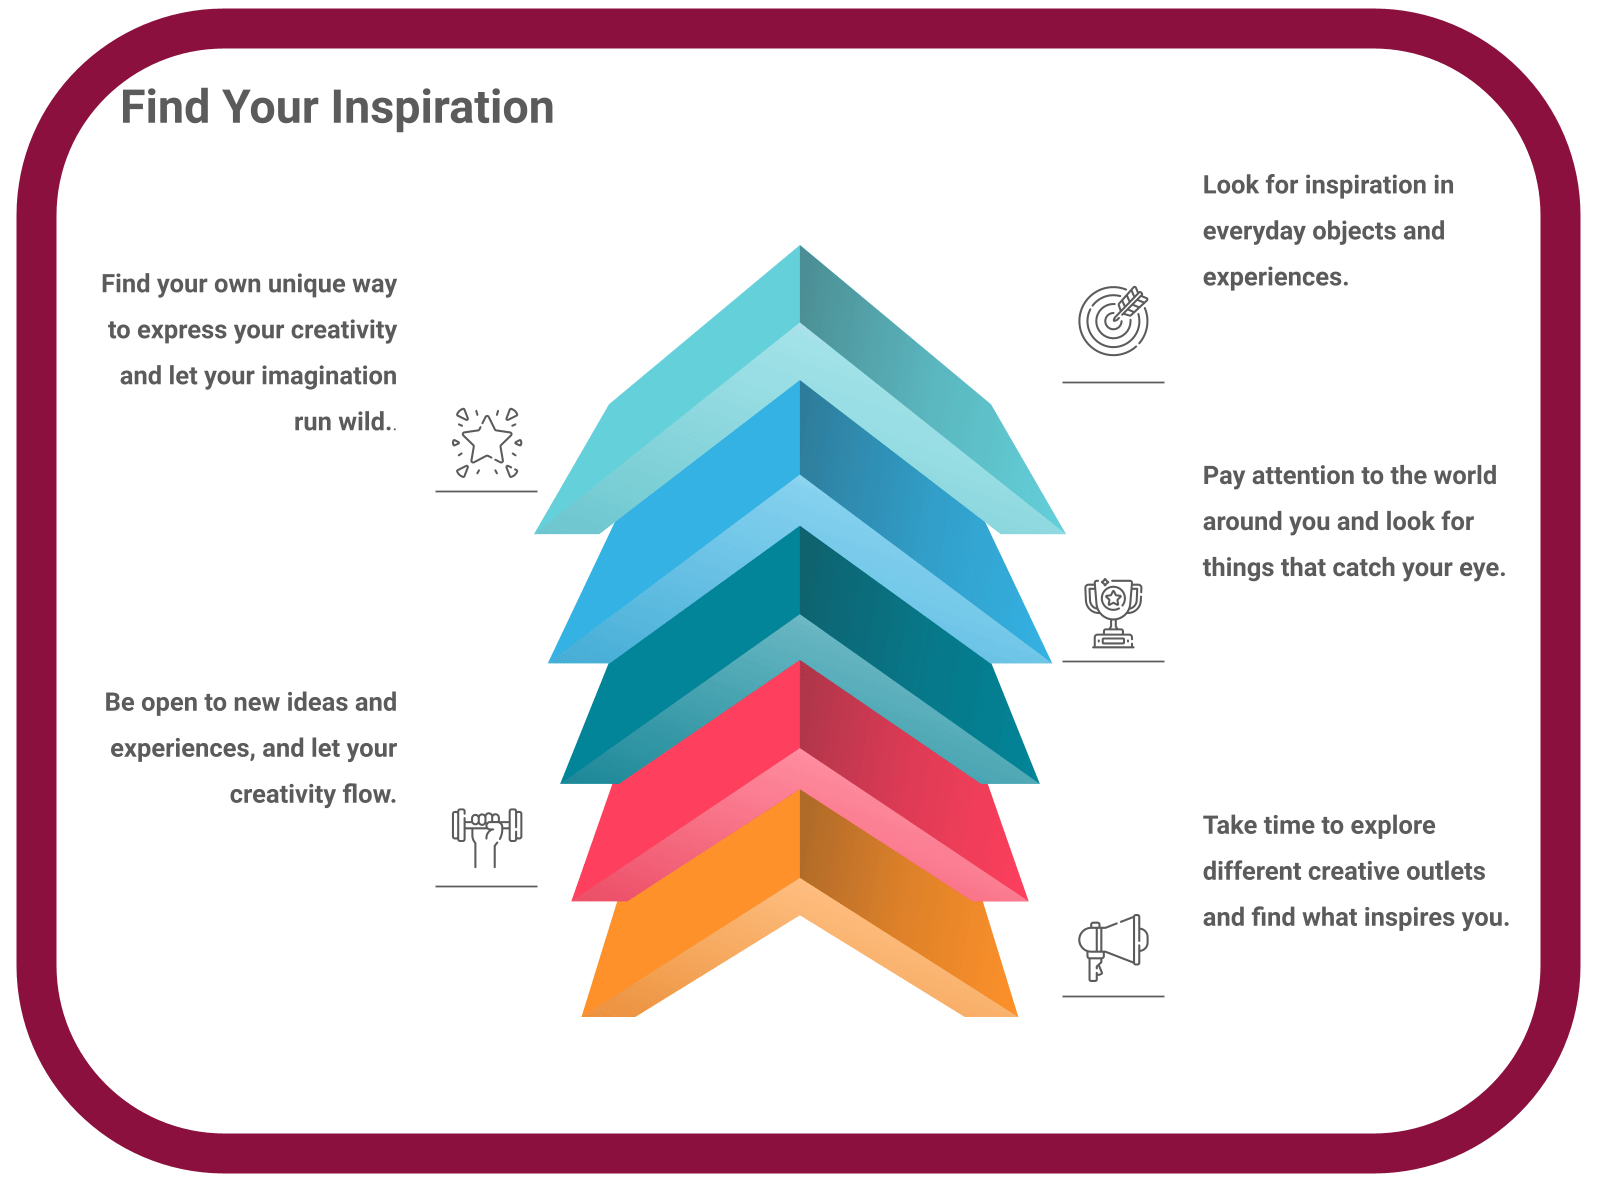 INFOGRAPHIC: Find your inspiration - Poll the People